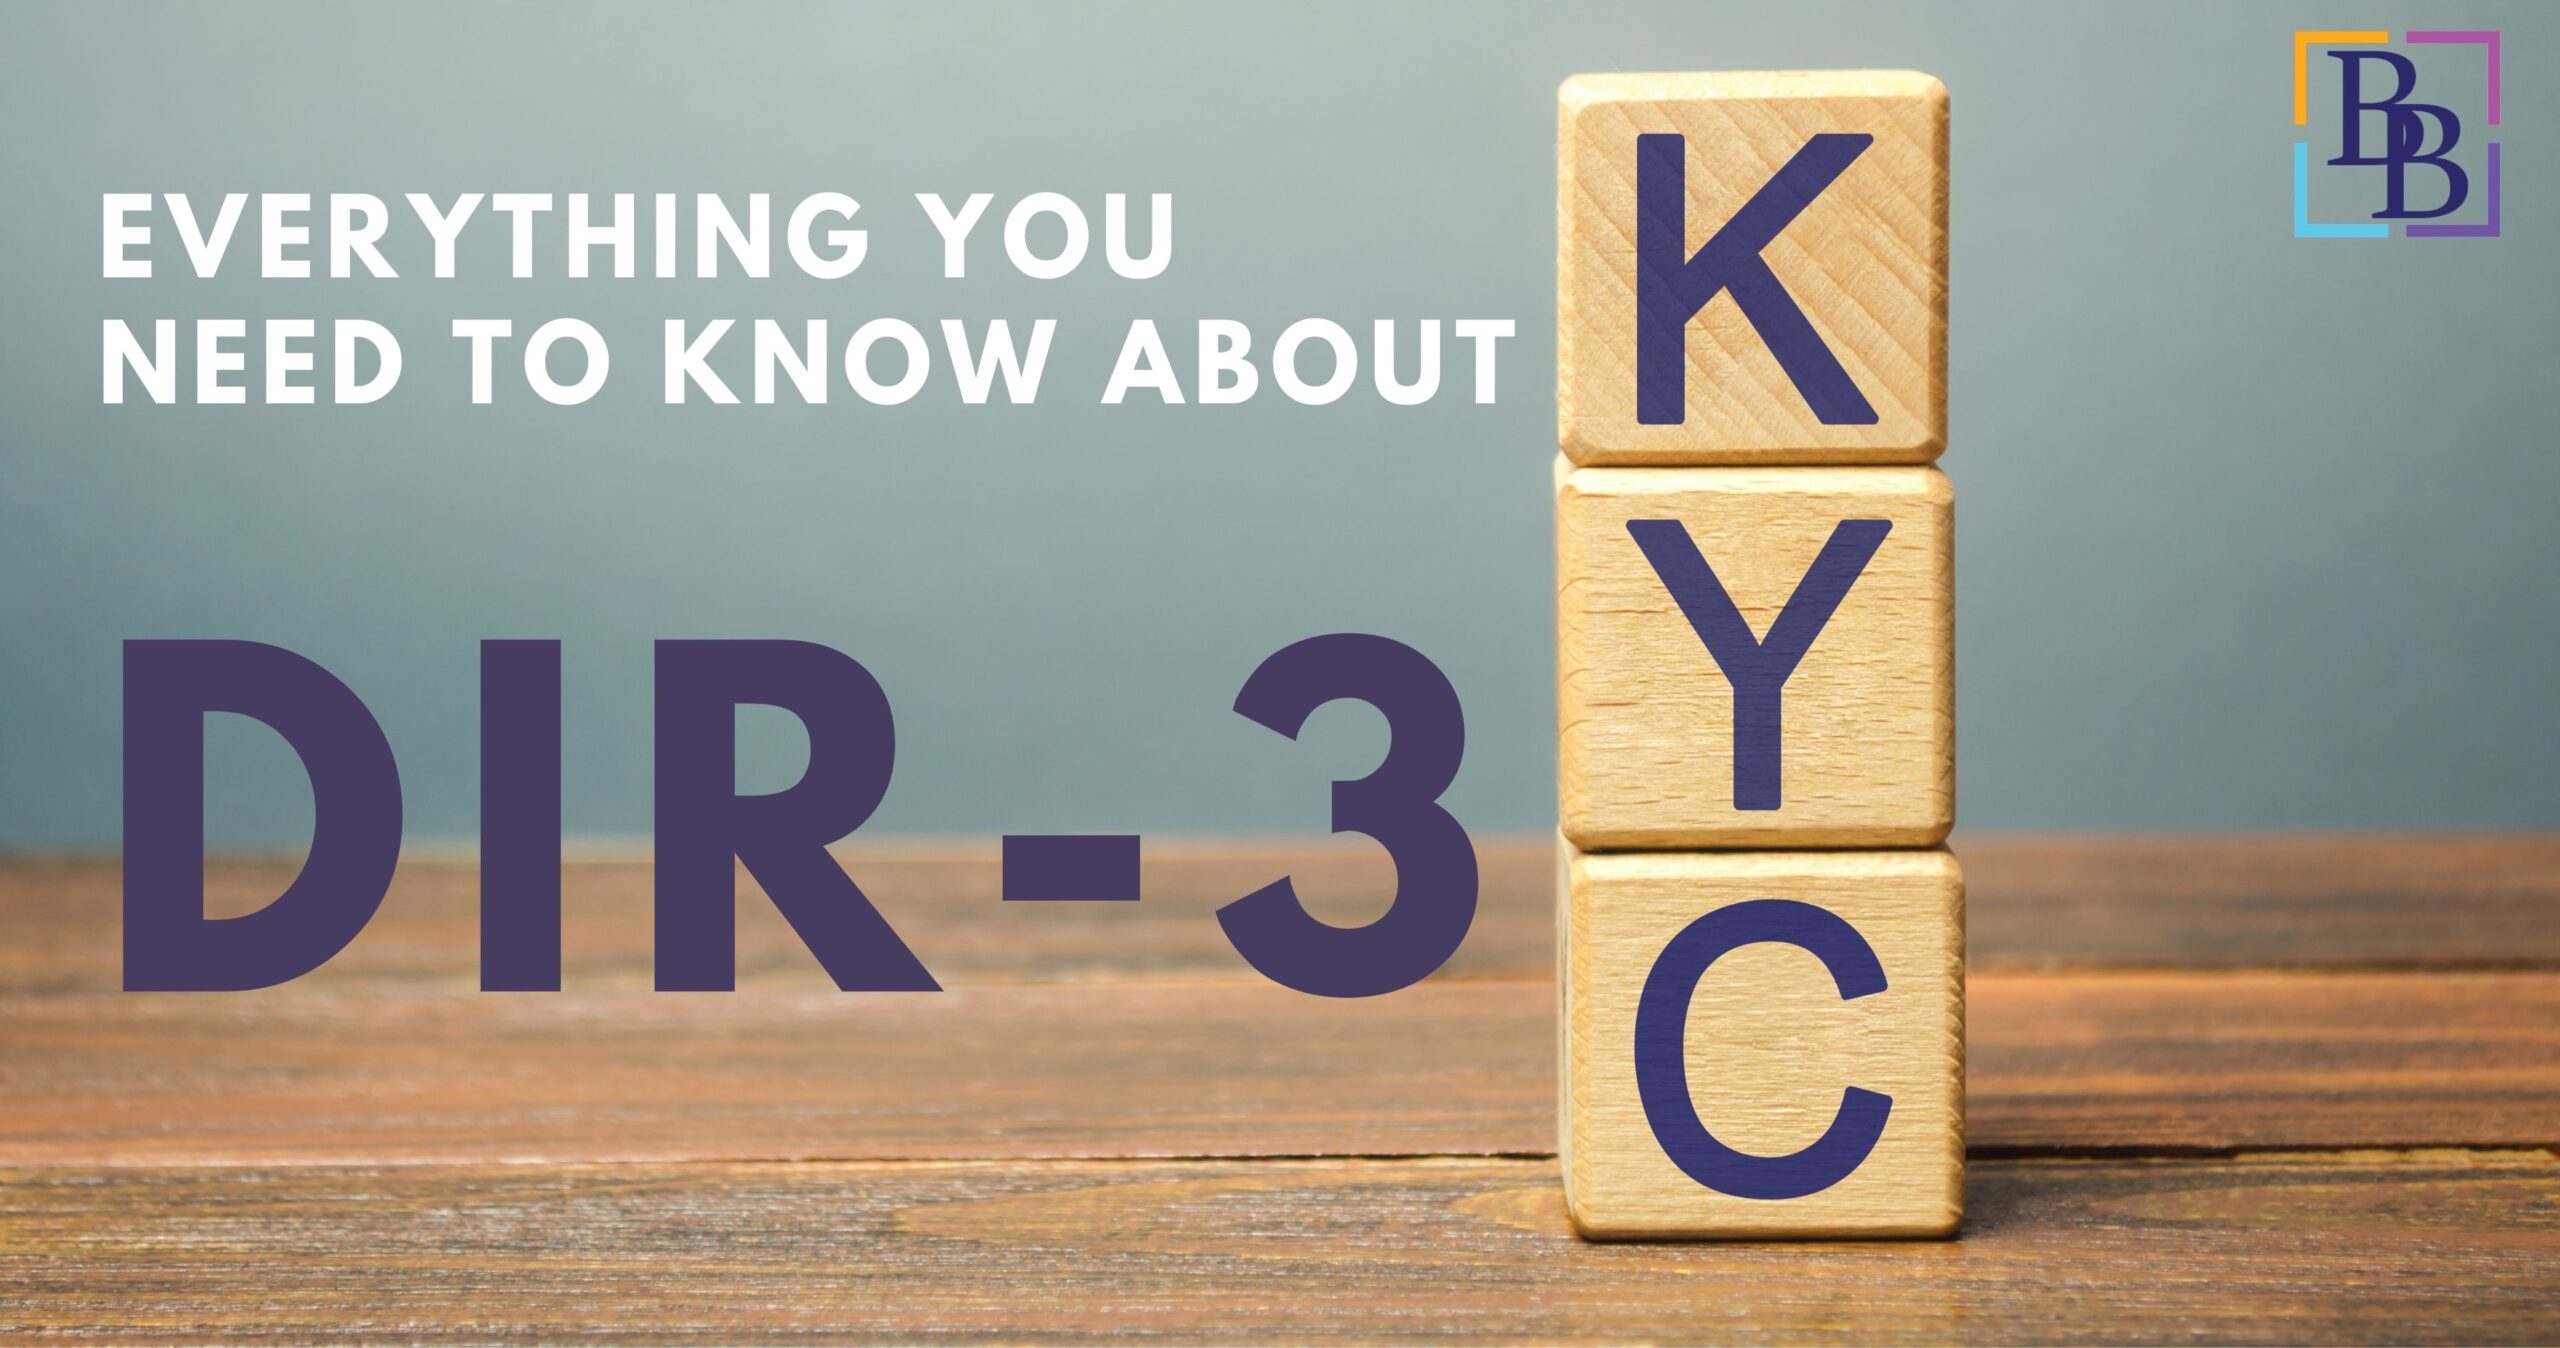 Everything you need to know about DIR 3 KYC